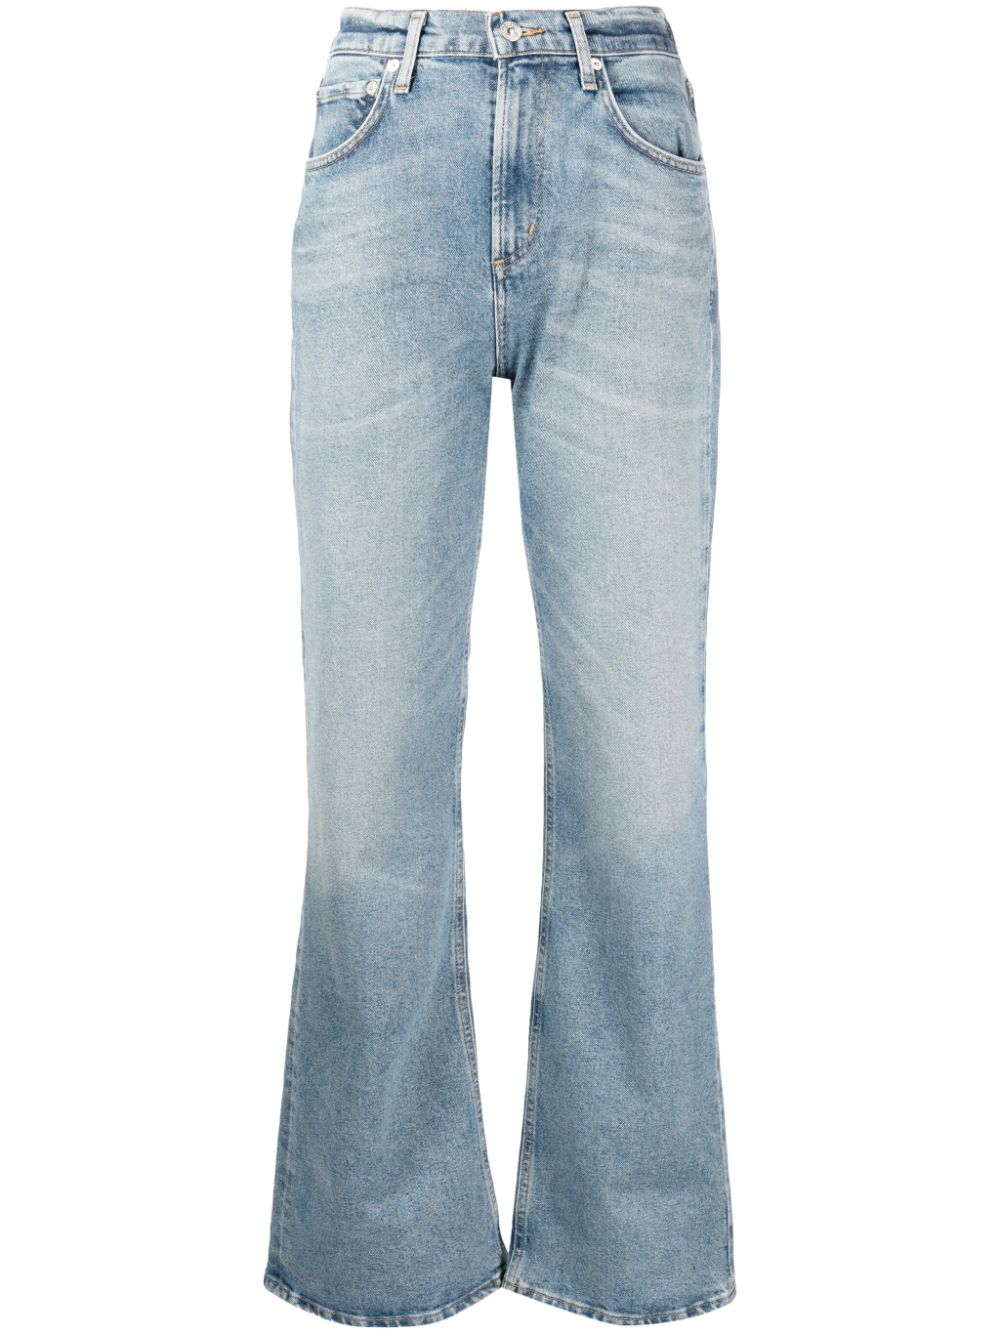 Citizens of Humanity Vidia high-waisted flared jeans - Blue von Citizens of Humanity